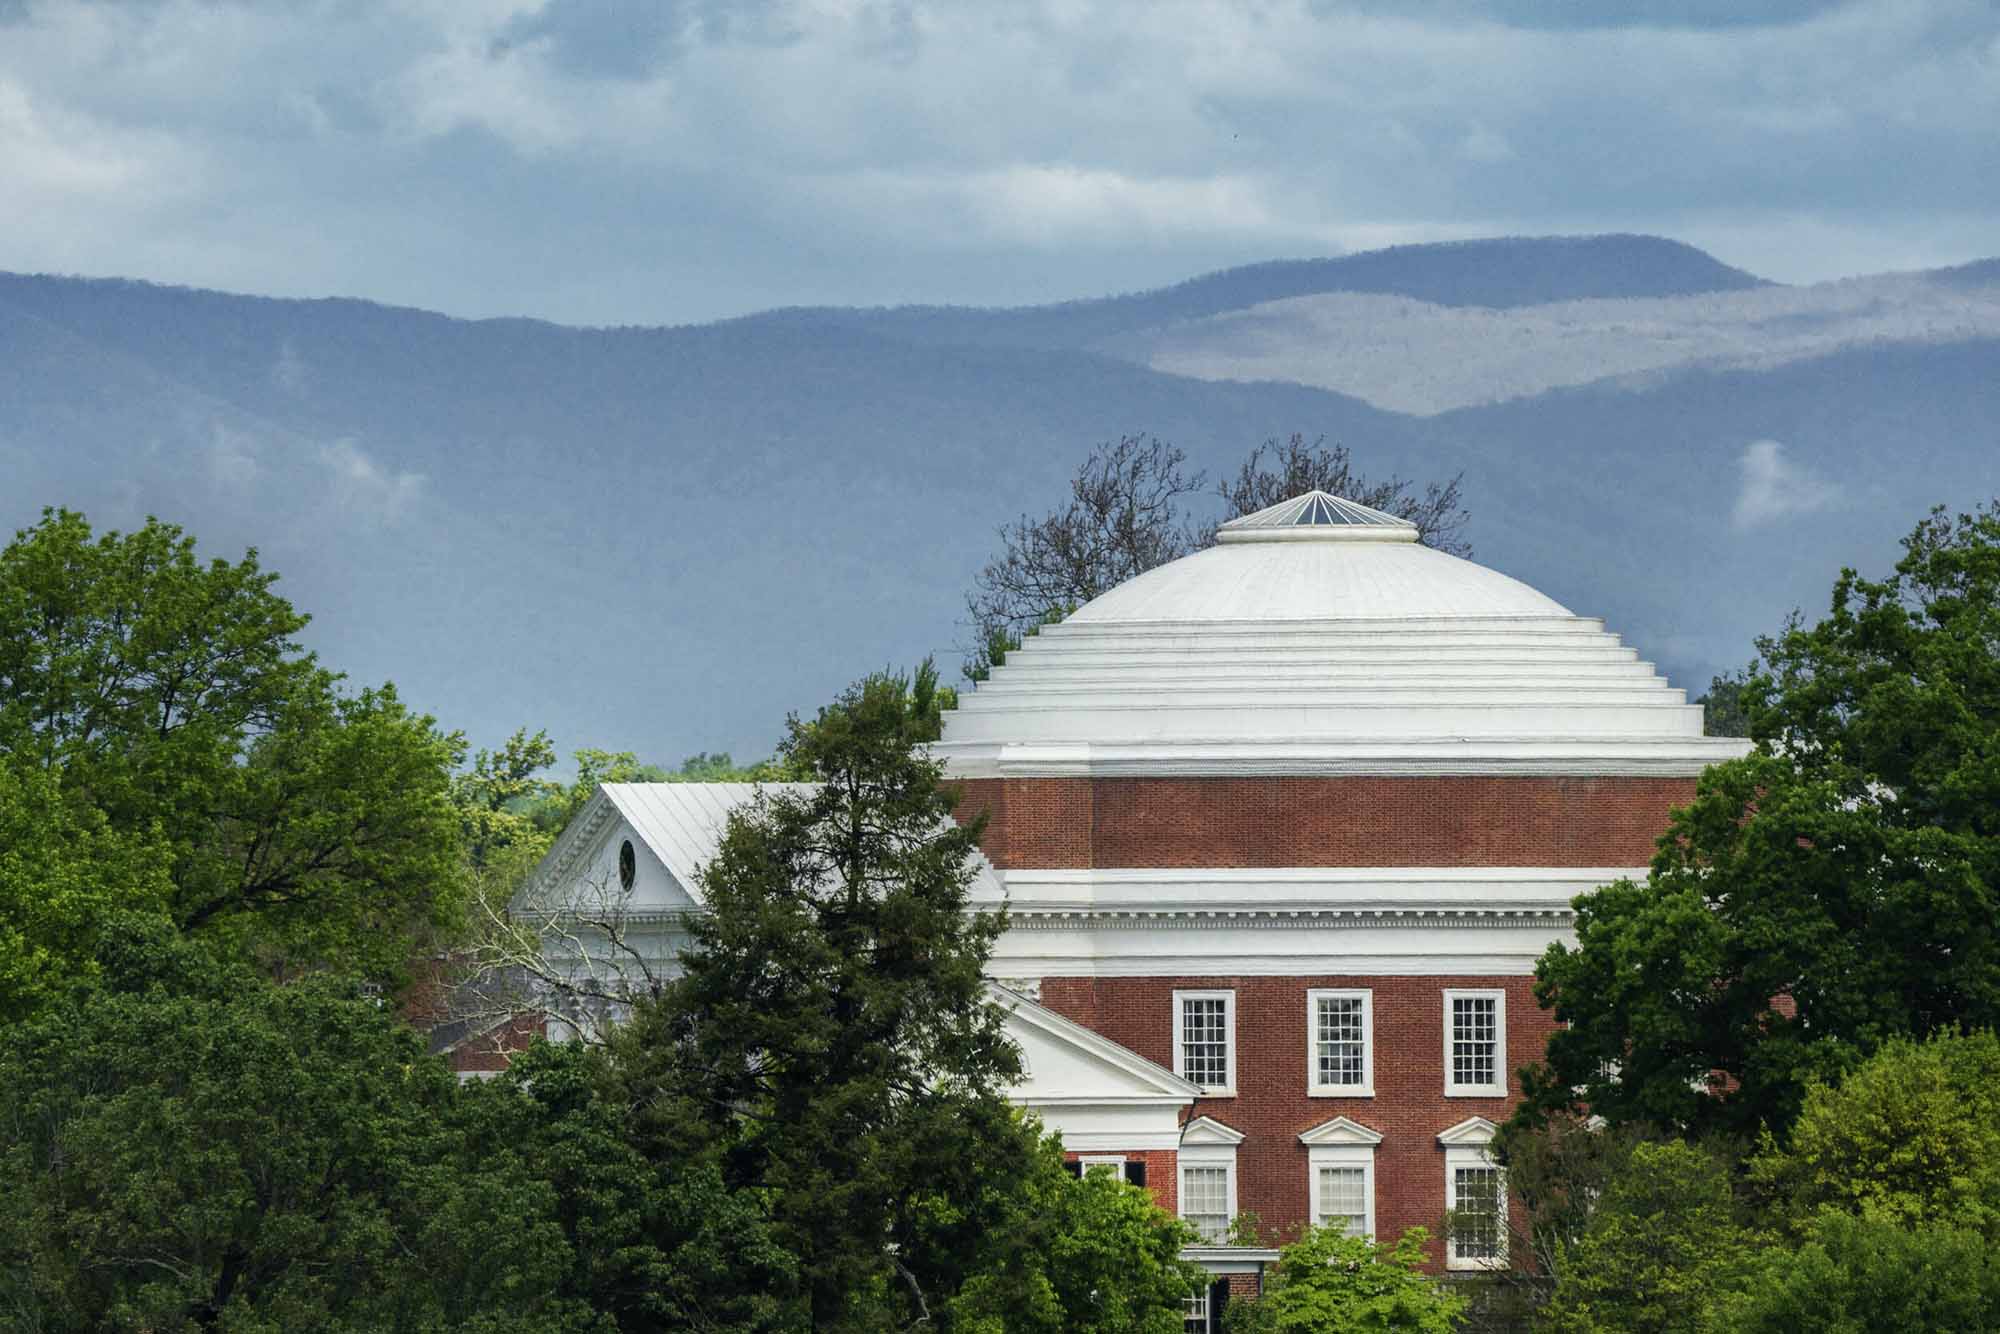 Arial view of the Rotunda backdropped by the Blue Ridge Mountain